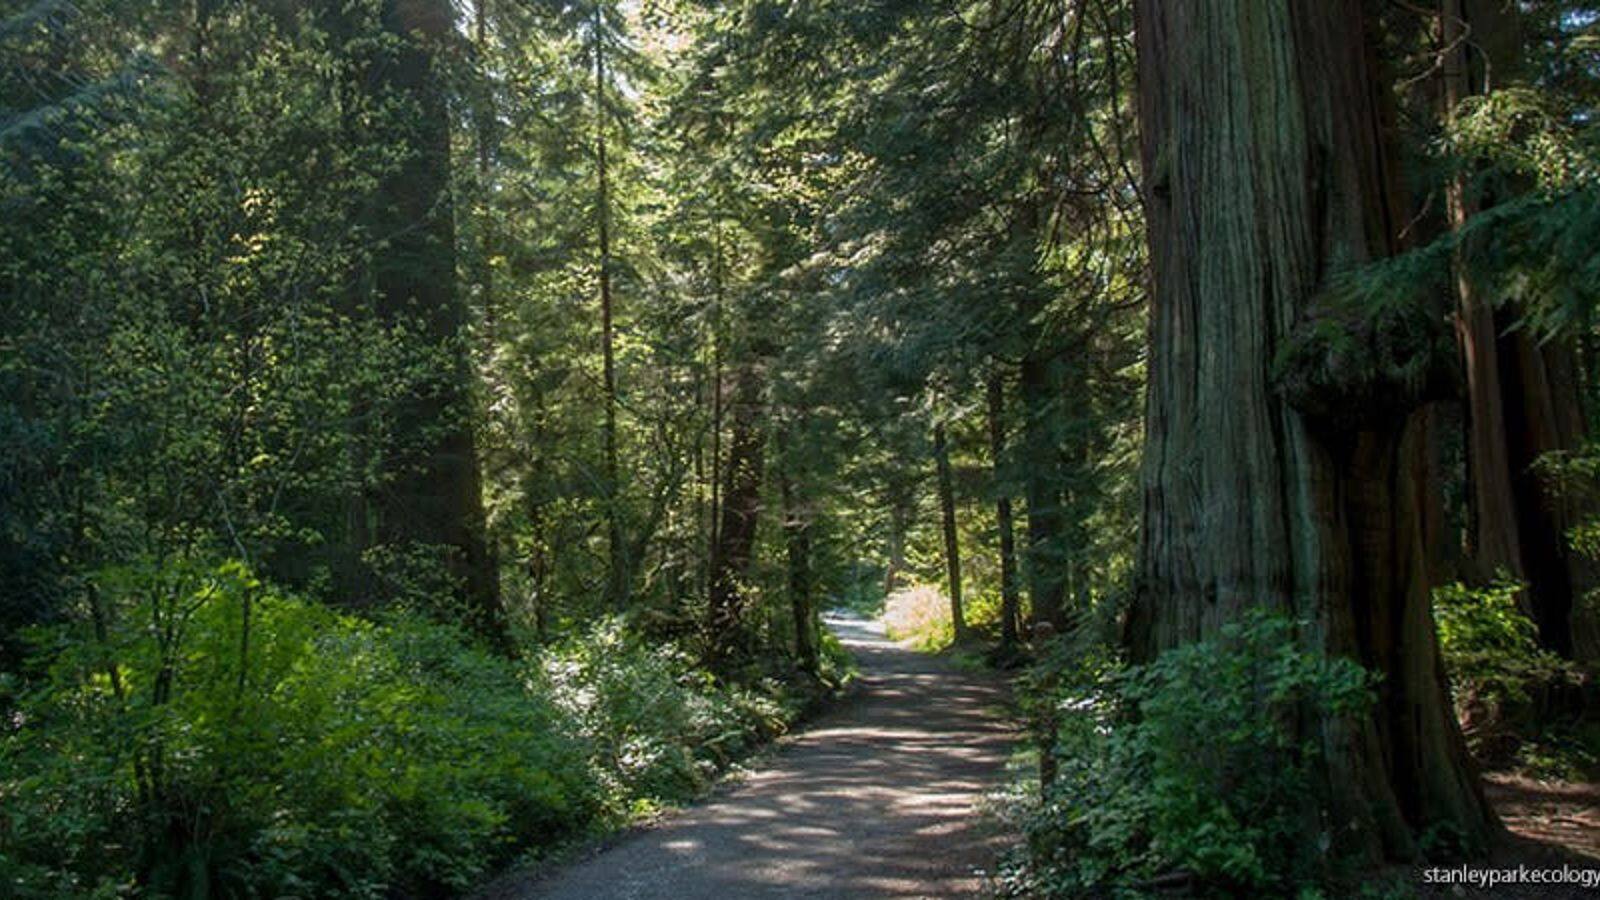 Vancouver's urban rainforests are perfect for nature lovers